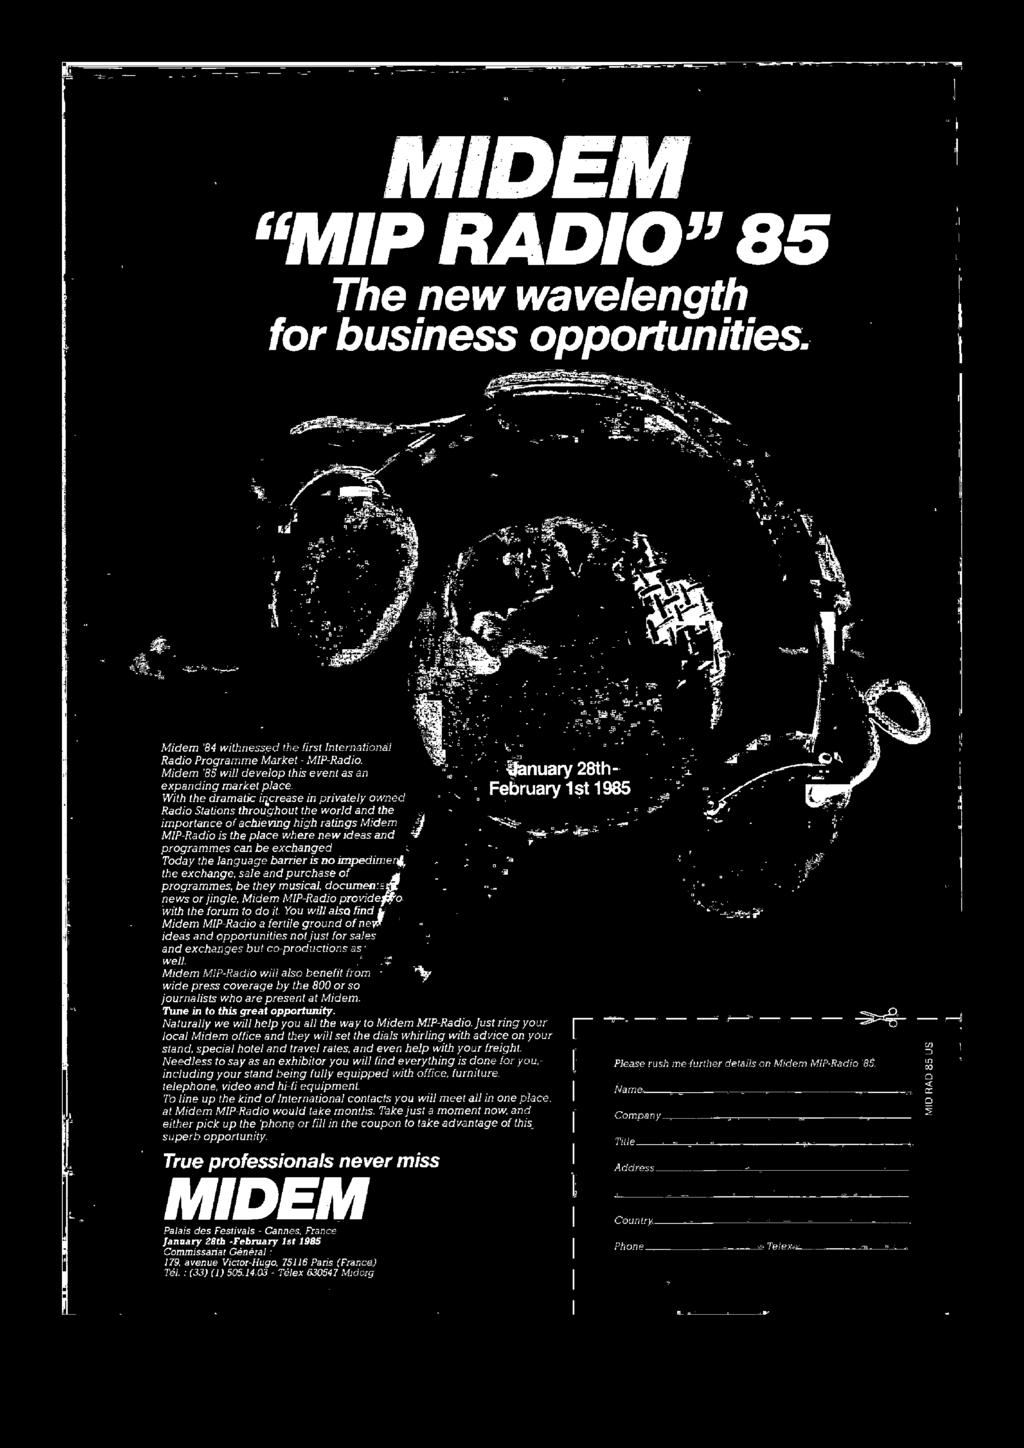 You will also find Midem MIP-Radio a fertile ground of ne, ideas and opportunities not just for sales and exchanges but co -productions as well.